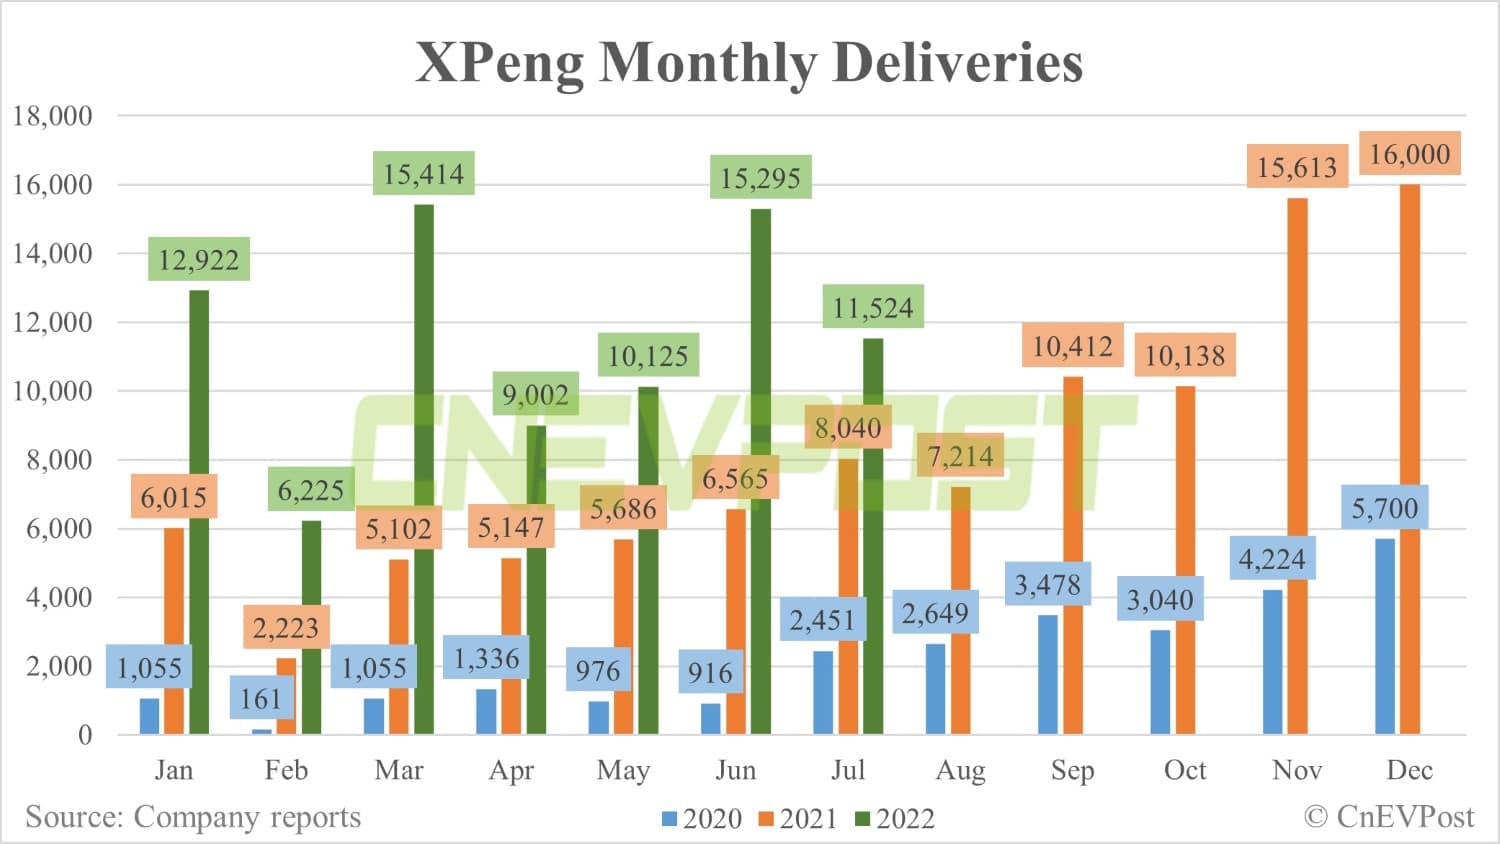 XPeng delivers 11,524 vehicles in July, down about 25% from June-CnEVPost